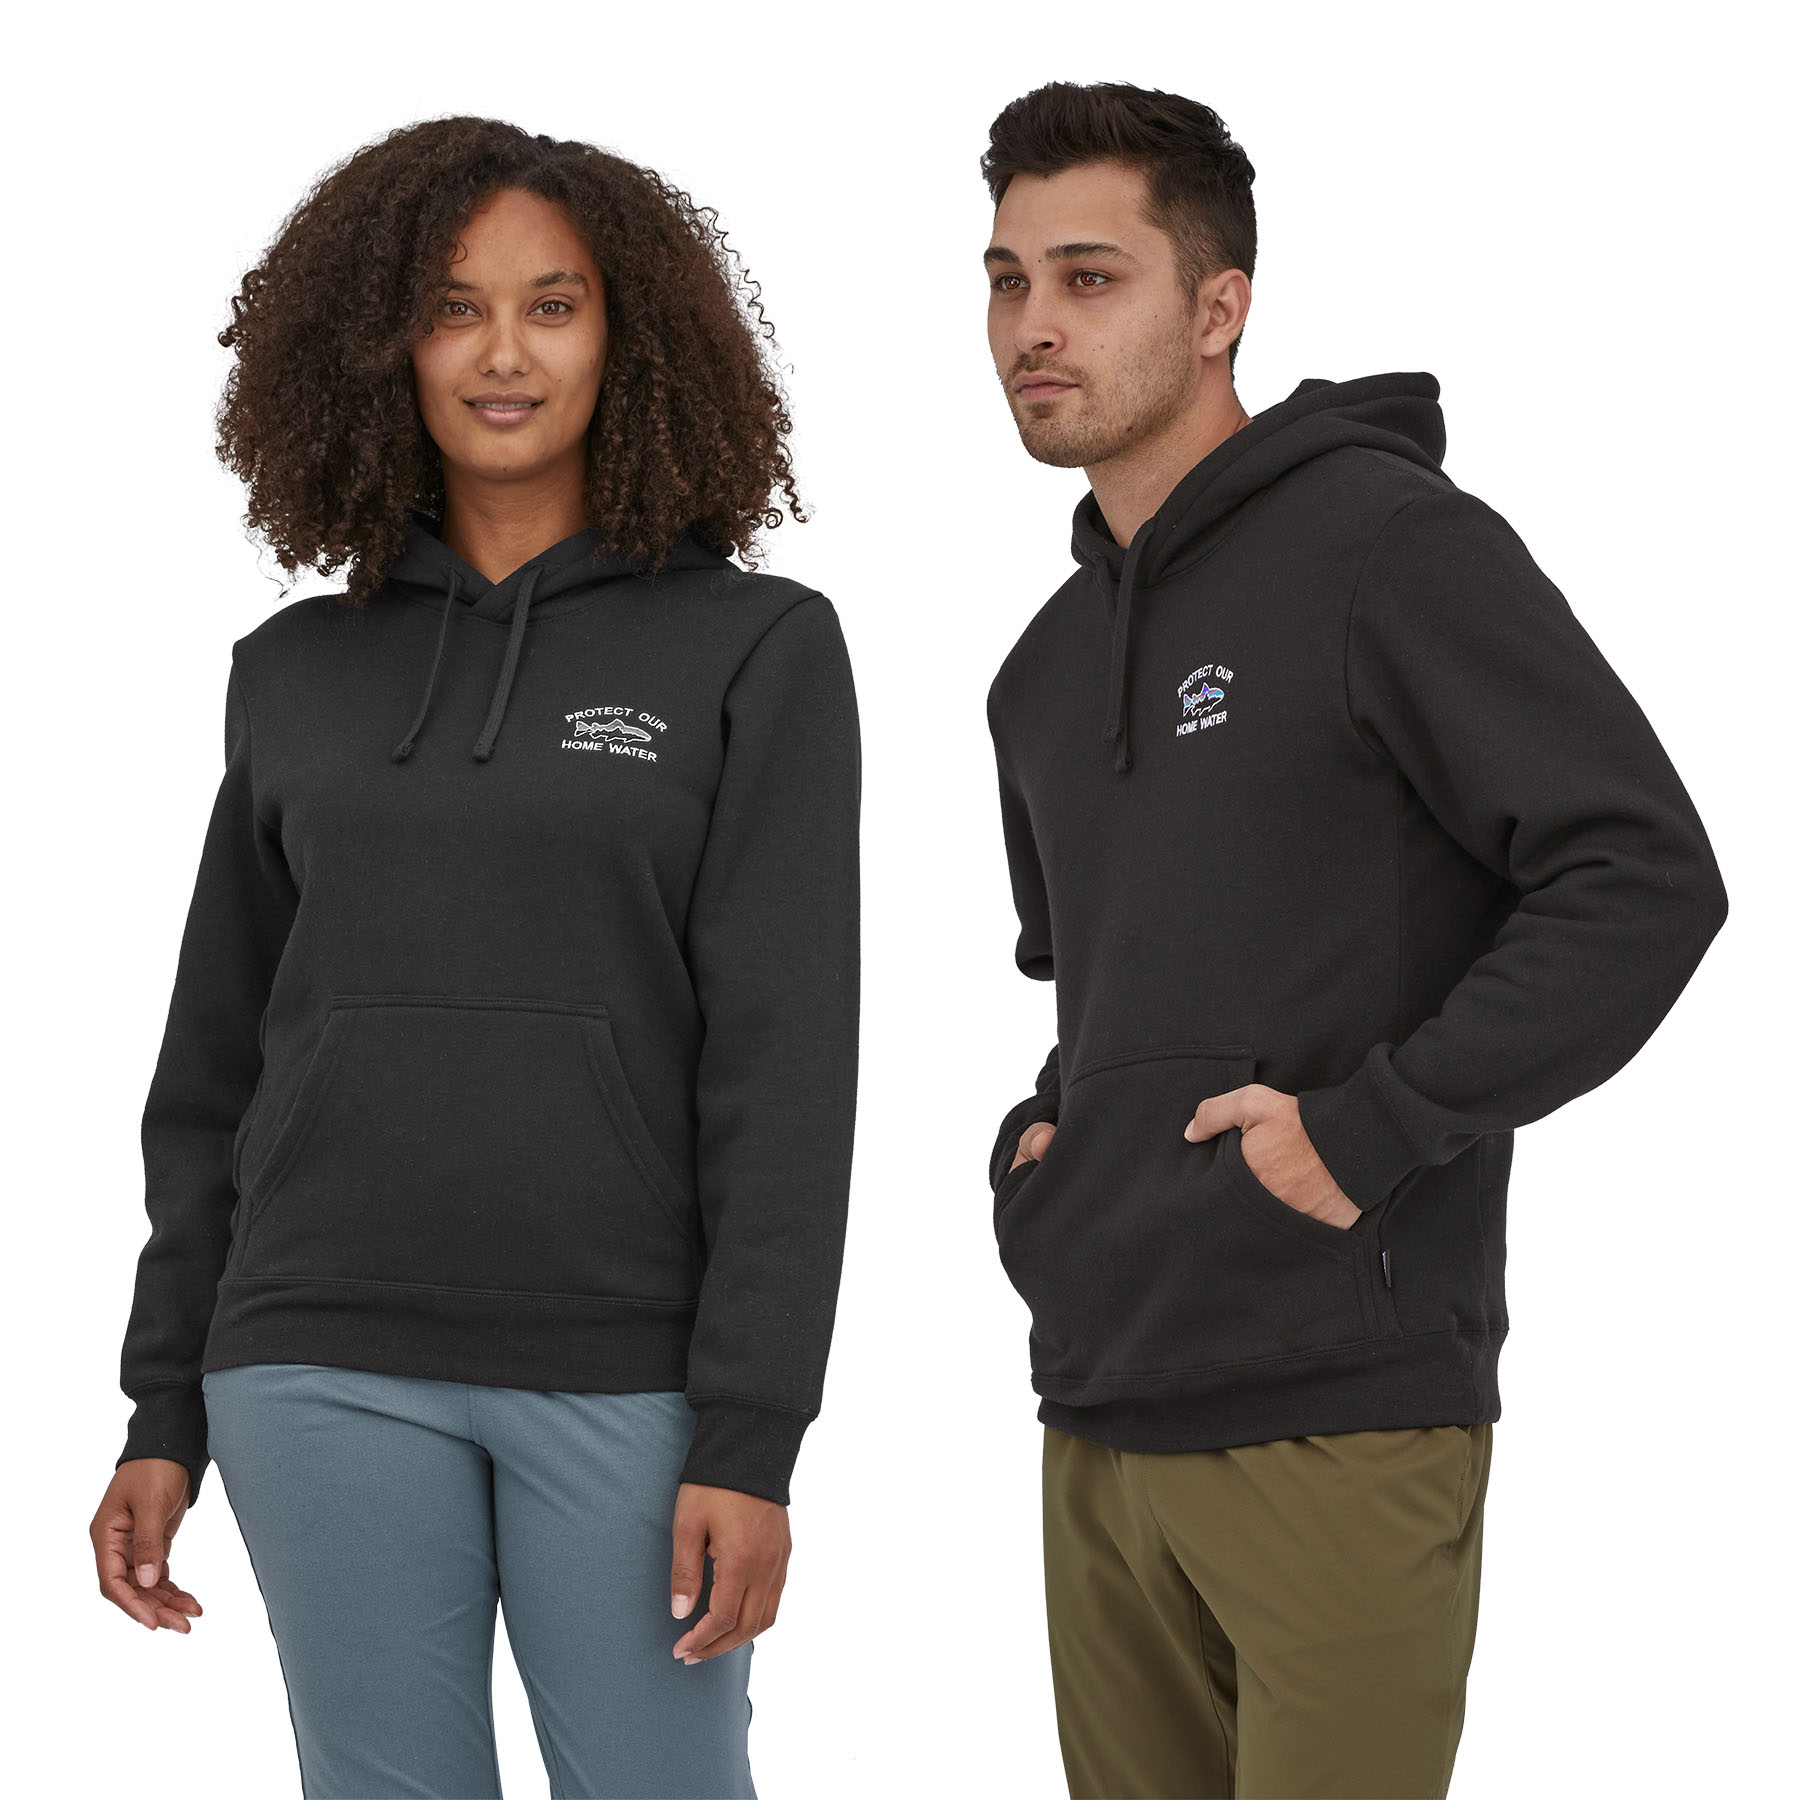 Home Water Trout Uprisal Hoody (black)